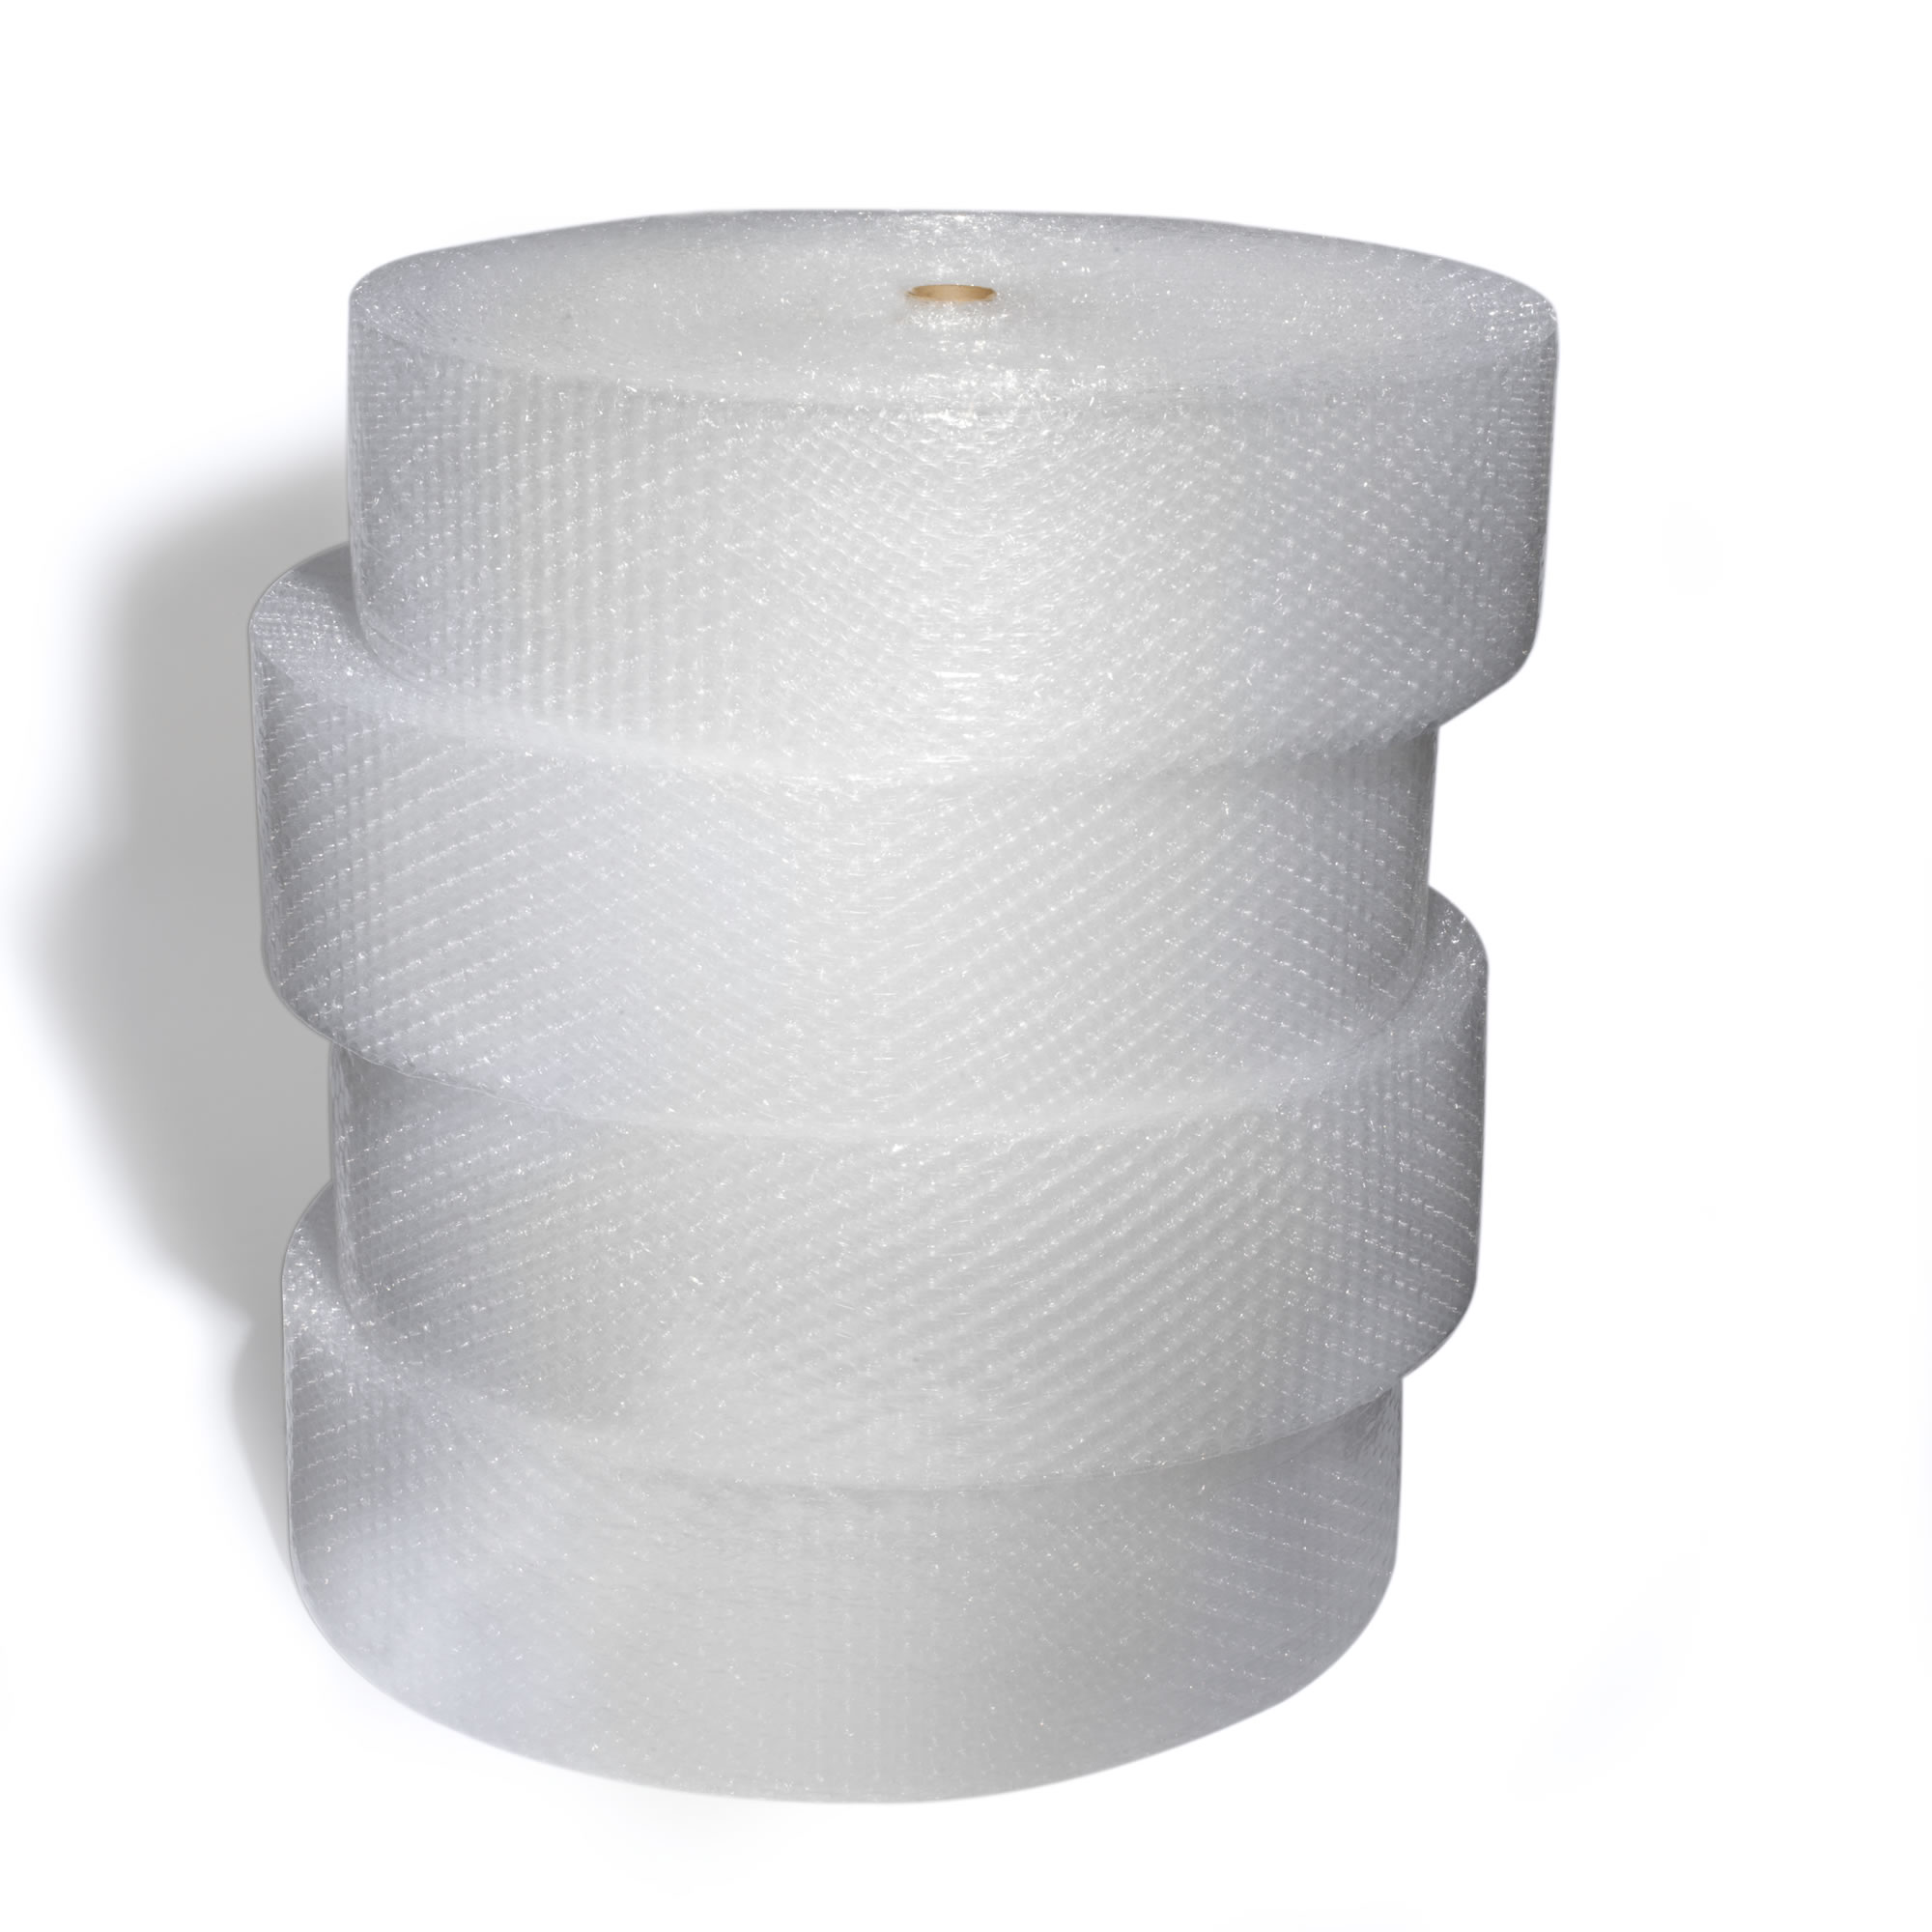 Pack of 4 1/2 Bubble Height 12 Width x 125L Clear Partners Brand PBWUP12S12MS Small Cushion Bubble Rolls for Moving